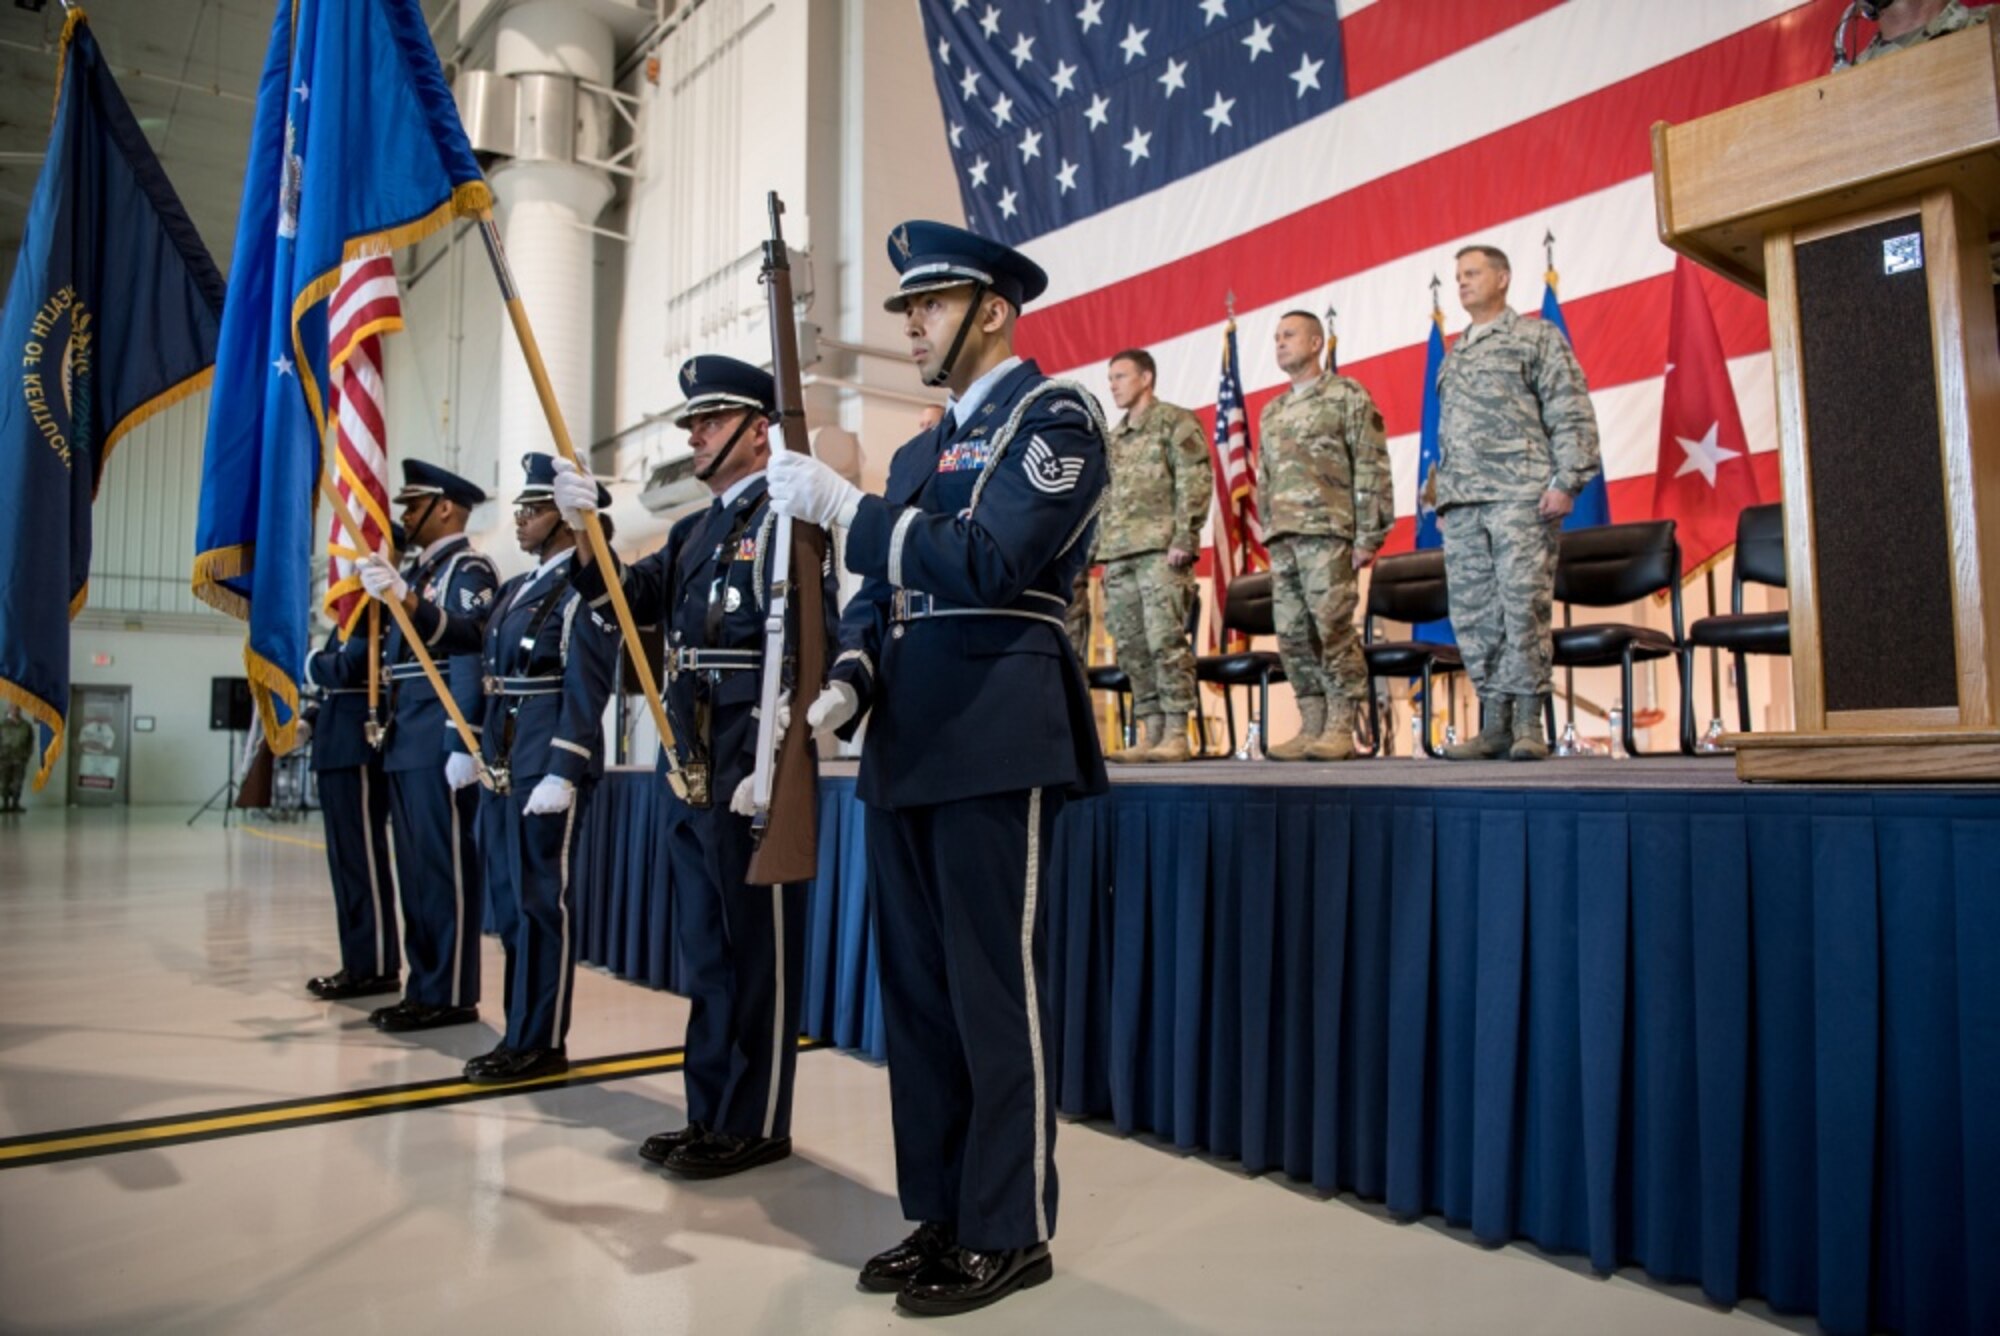 The 123rd Airlift Wing Honor Guard presents the colors during a transfer-of-responsibility ceremony at the Kentucky Air National Guard Base in Louisville, Ky., Aug. 11, 2019. Brig. Gen. Jeffrey Wilkinson assumed command of the Kentucky Air National Guard at the ceremony, replacing Brig. Gen. Warren Hurst, who is stepping down as assistant adjutant general for Air. (U.S. Air National Guard photo by Staff Sgt. Joshua Horton)